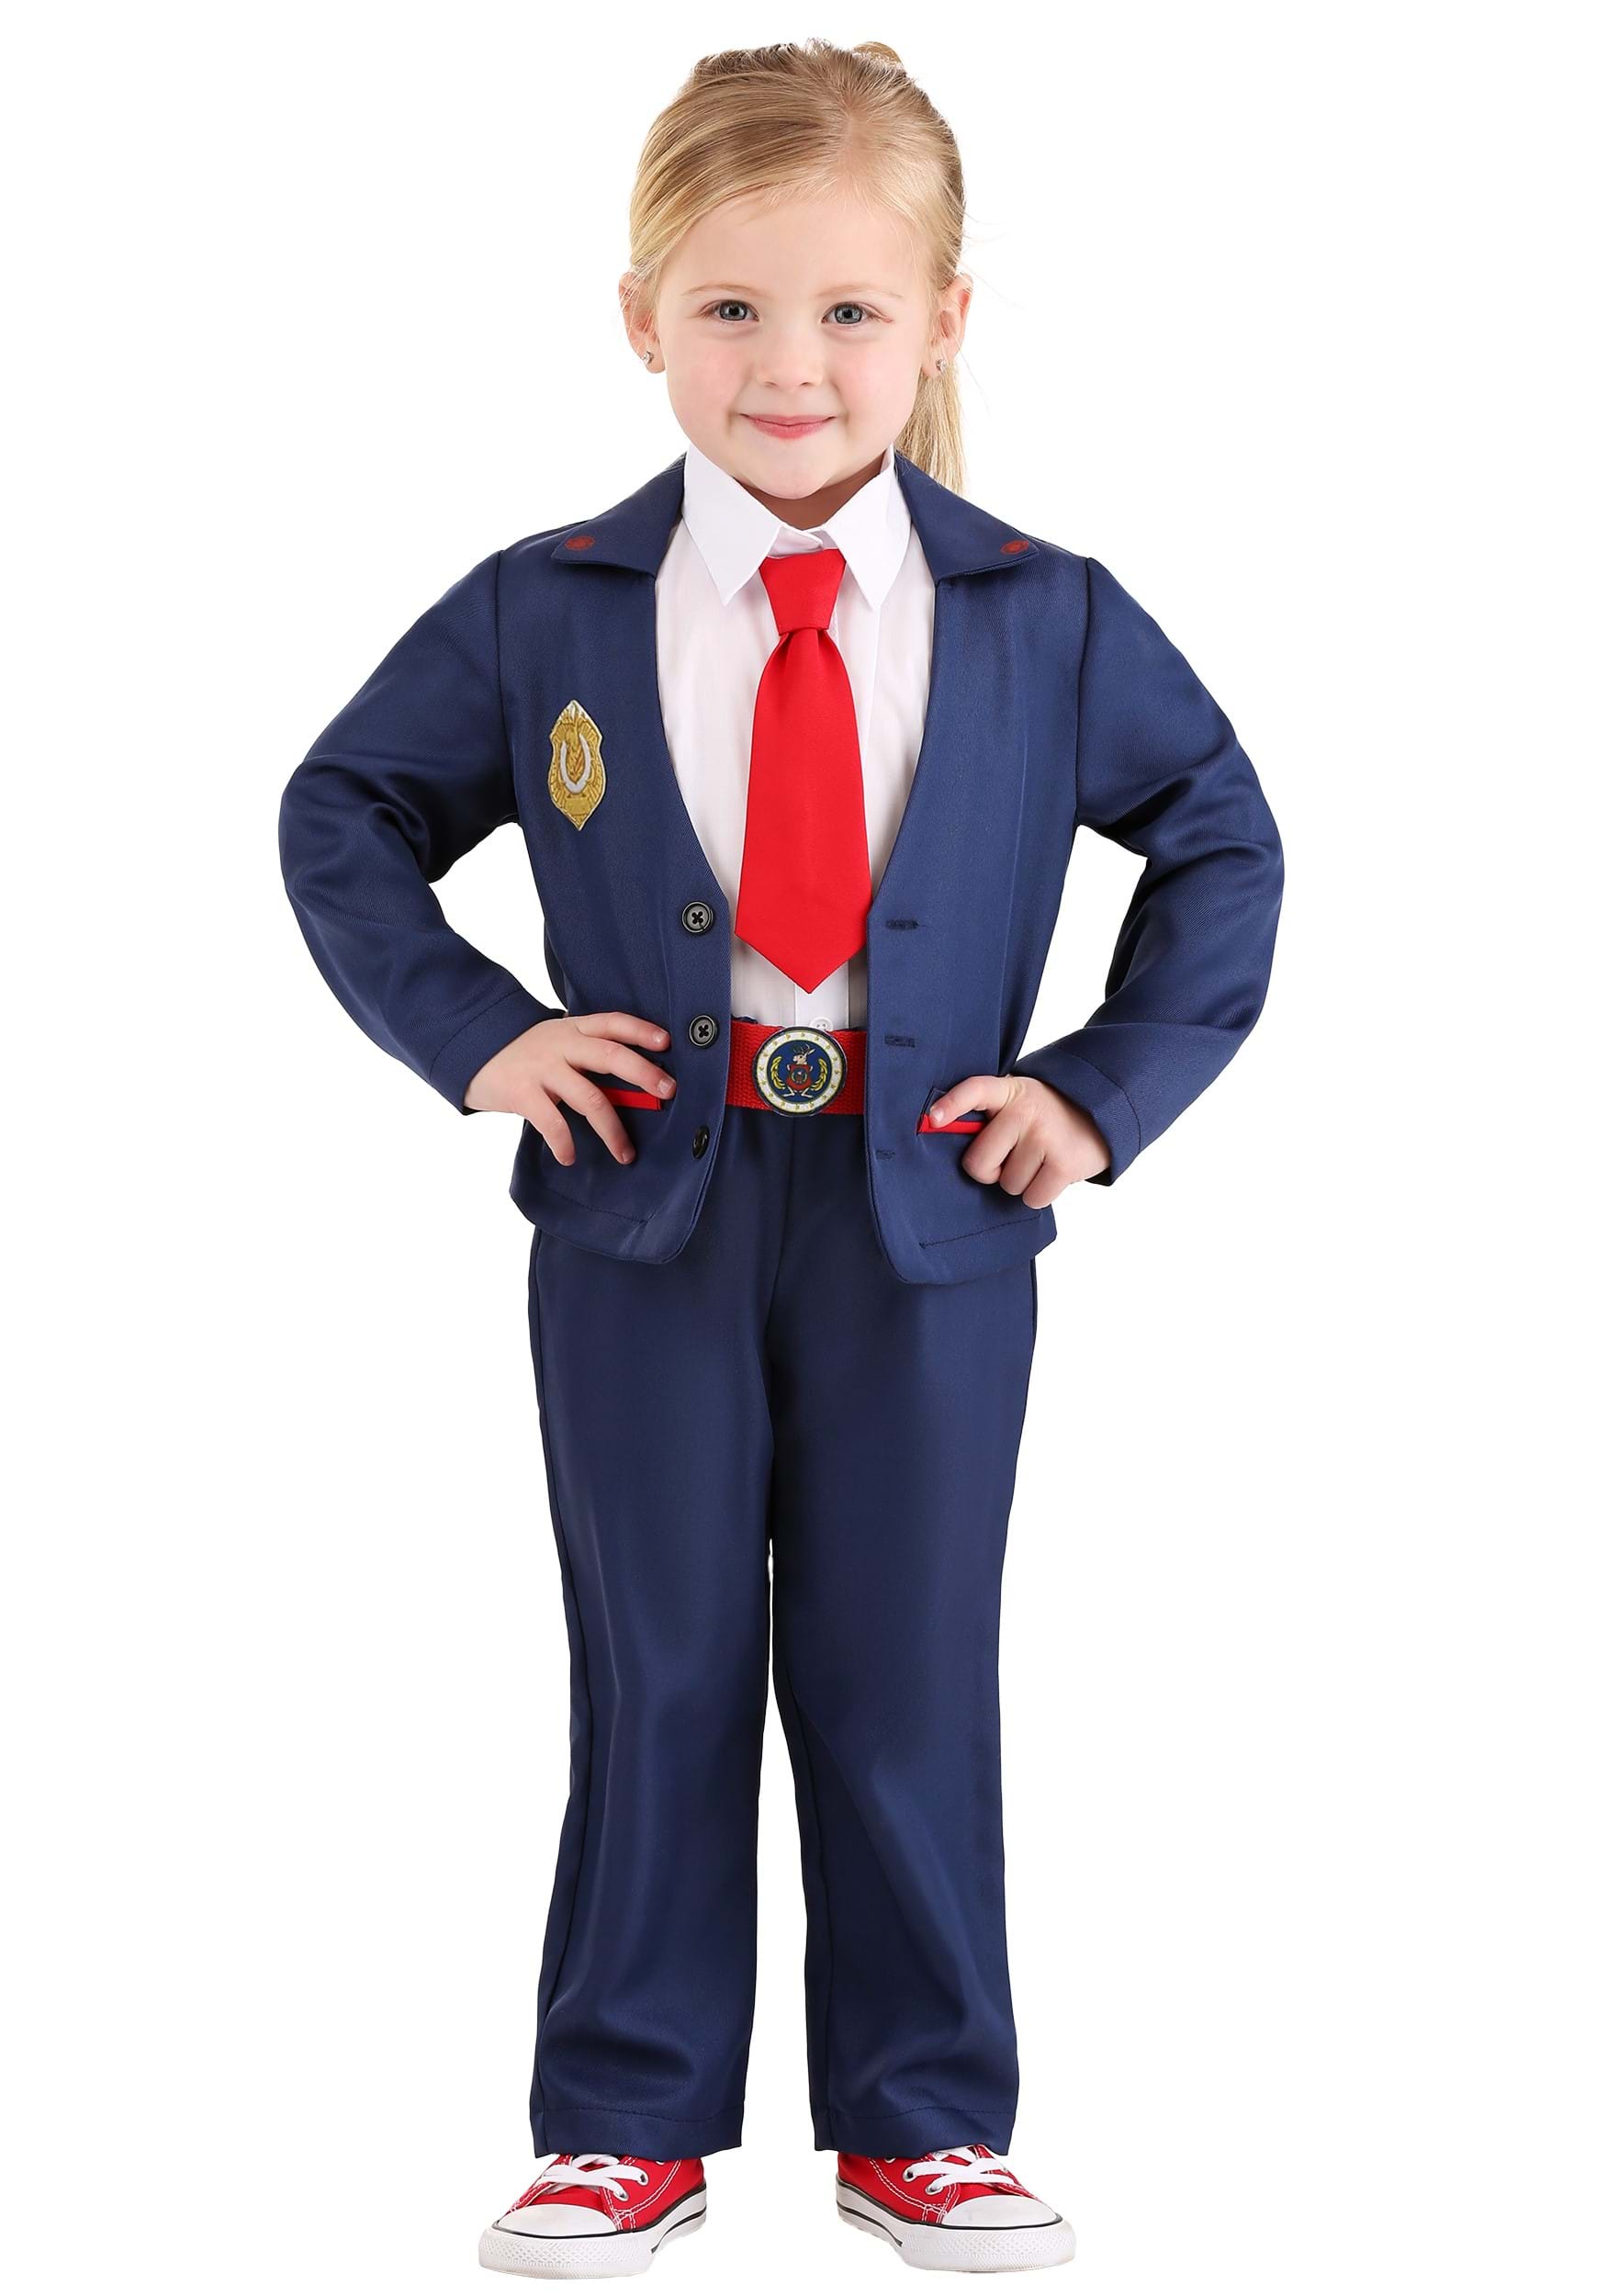 Photos - Fancy Dress Toddler FUN Costumes  Costume ODD SQUAD Agent Blue/Red/White FUN068 